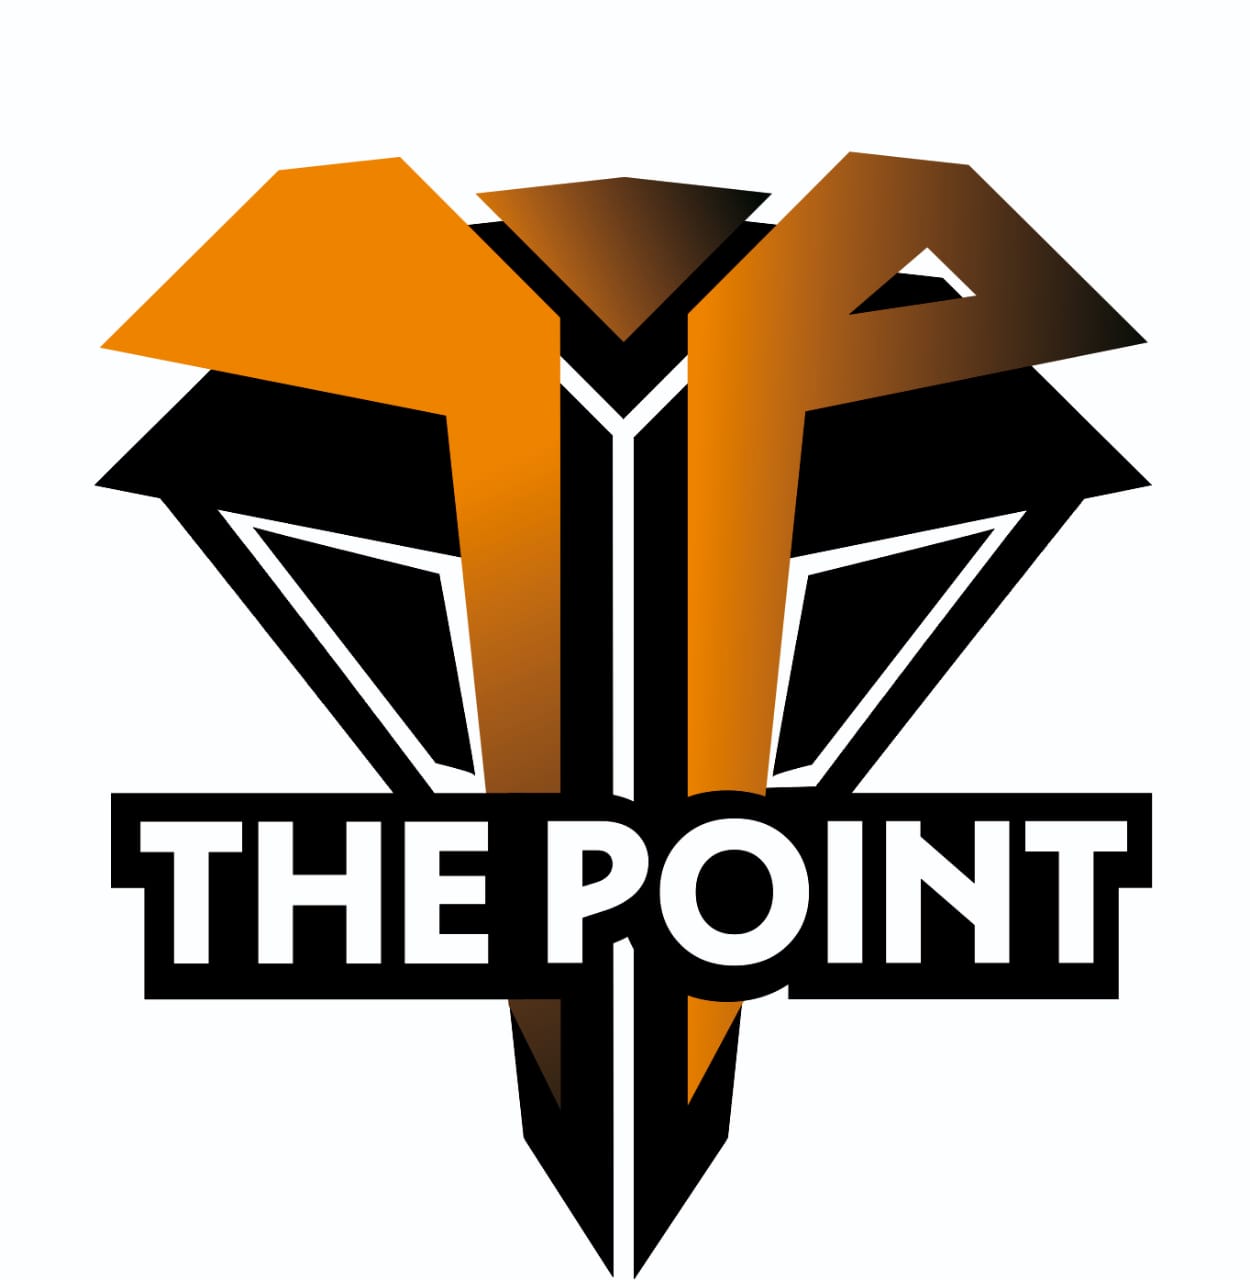 The Point (TP)